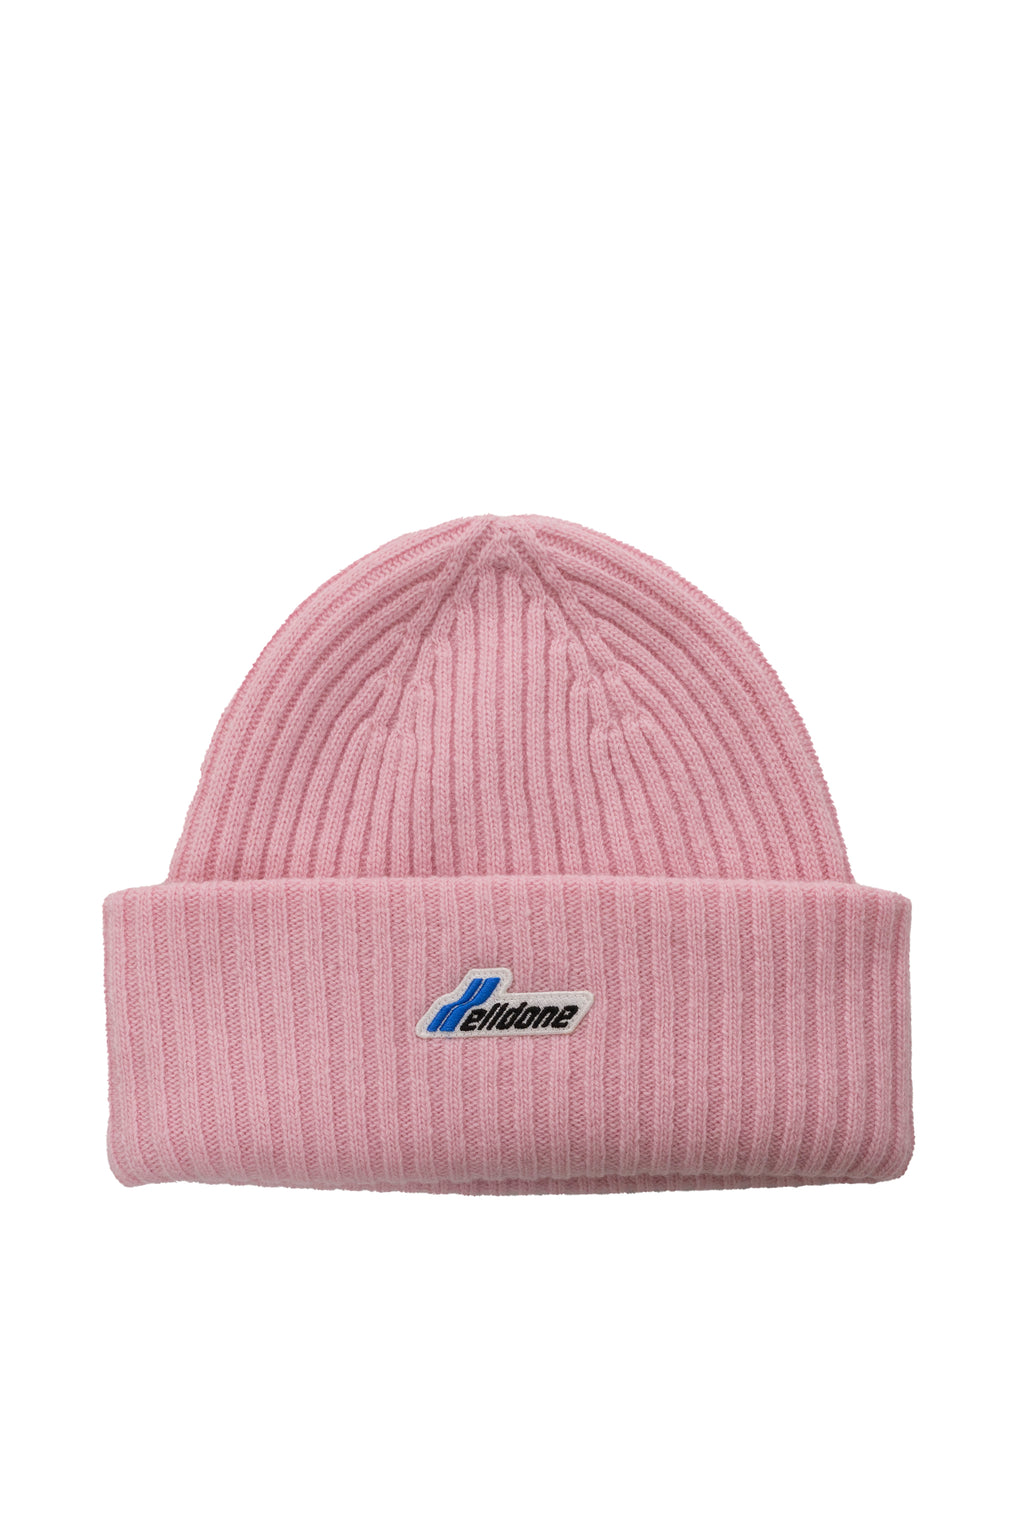 WE11DONE FW23 LIGHT PINK LOGO PATCHED KNIT BEANIE / L.PNK -NUBIAN